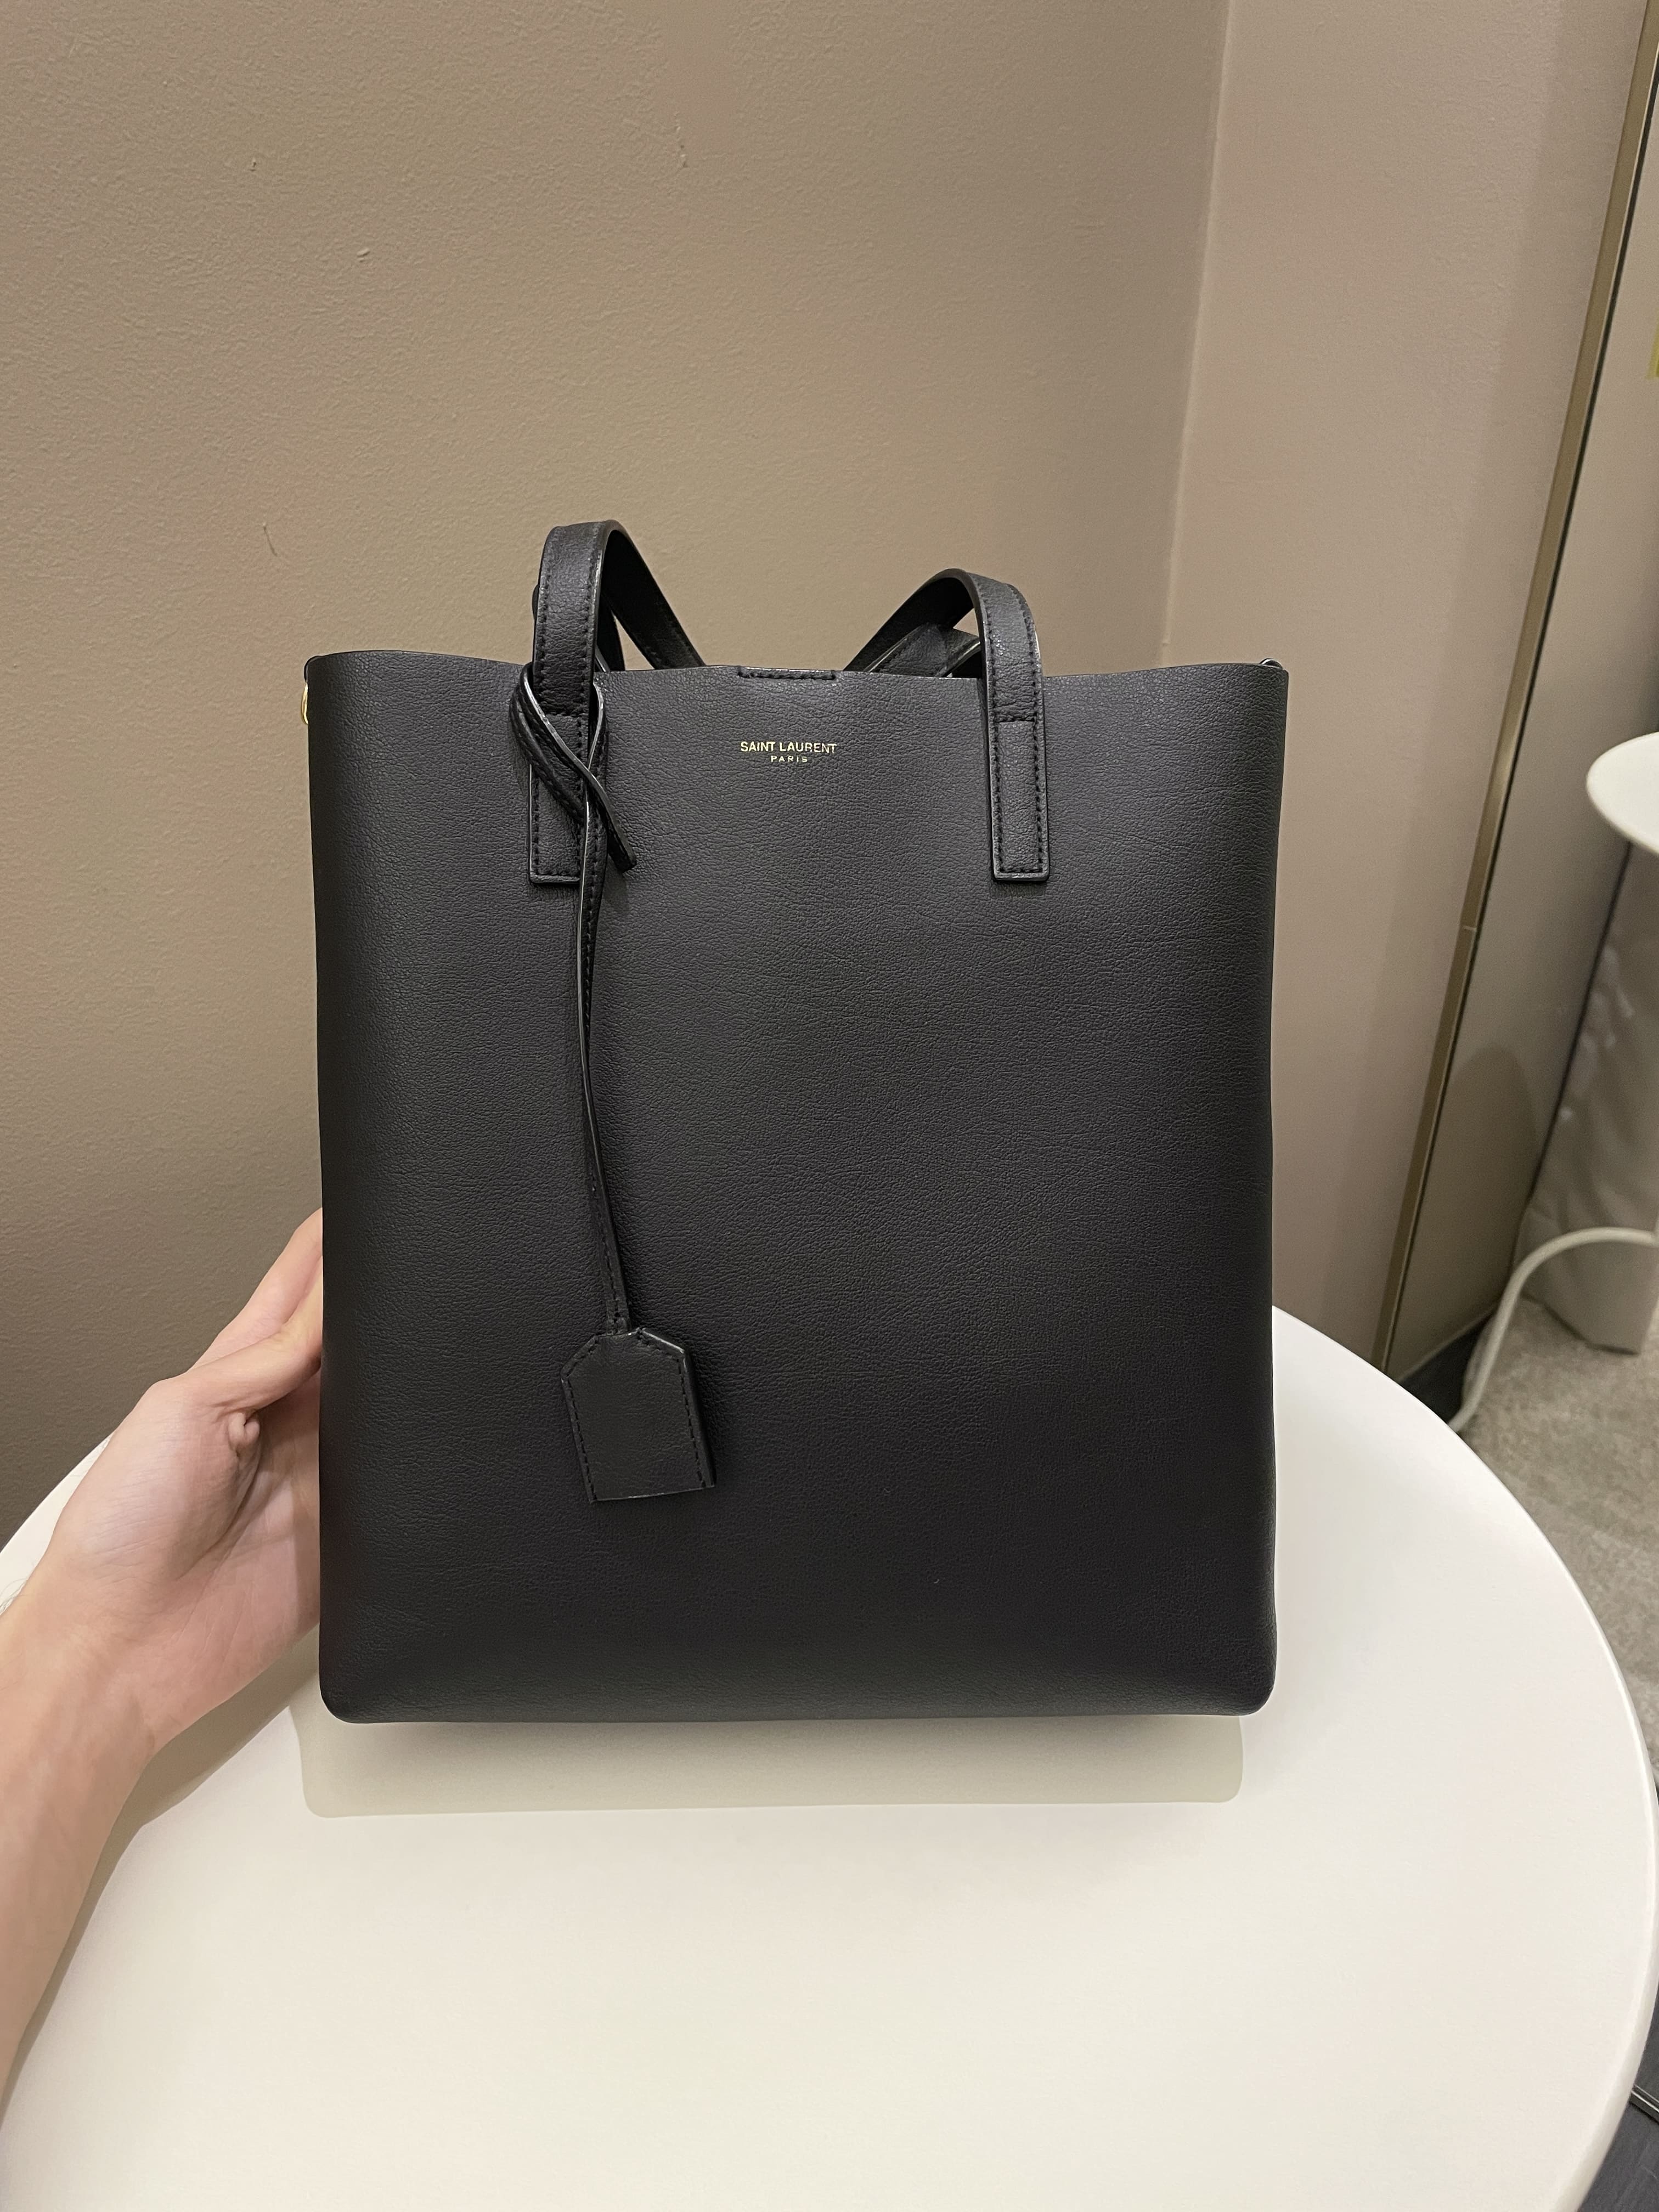 Saint Laurent Shopping Bag Toy in Gray